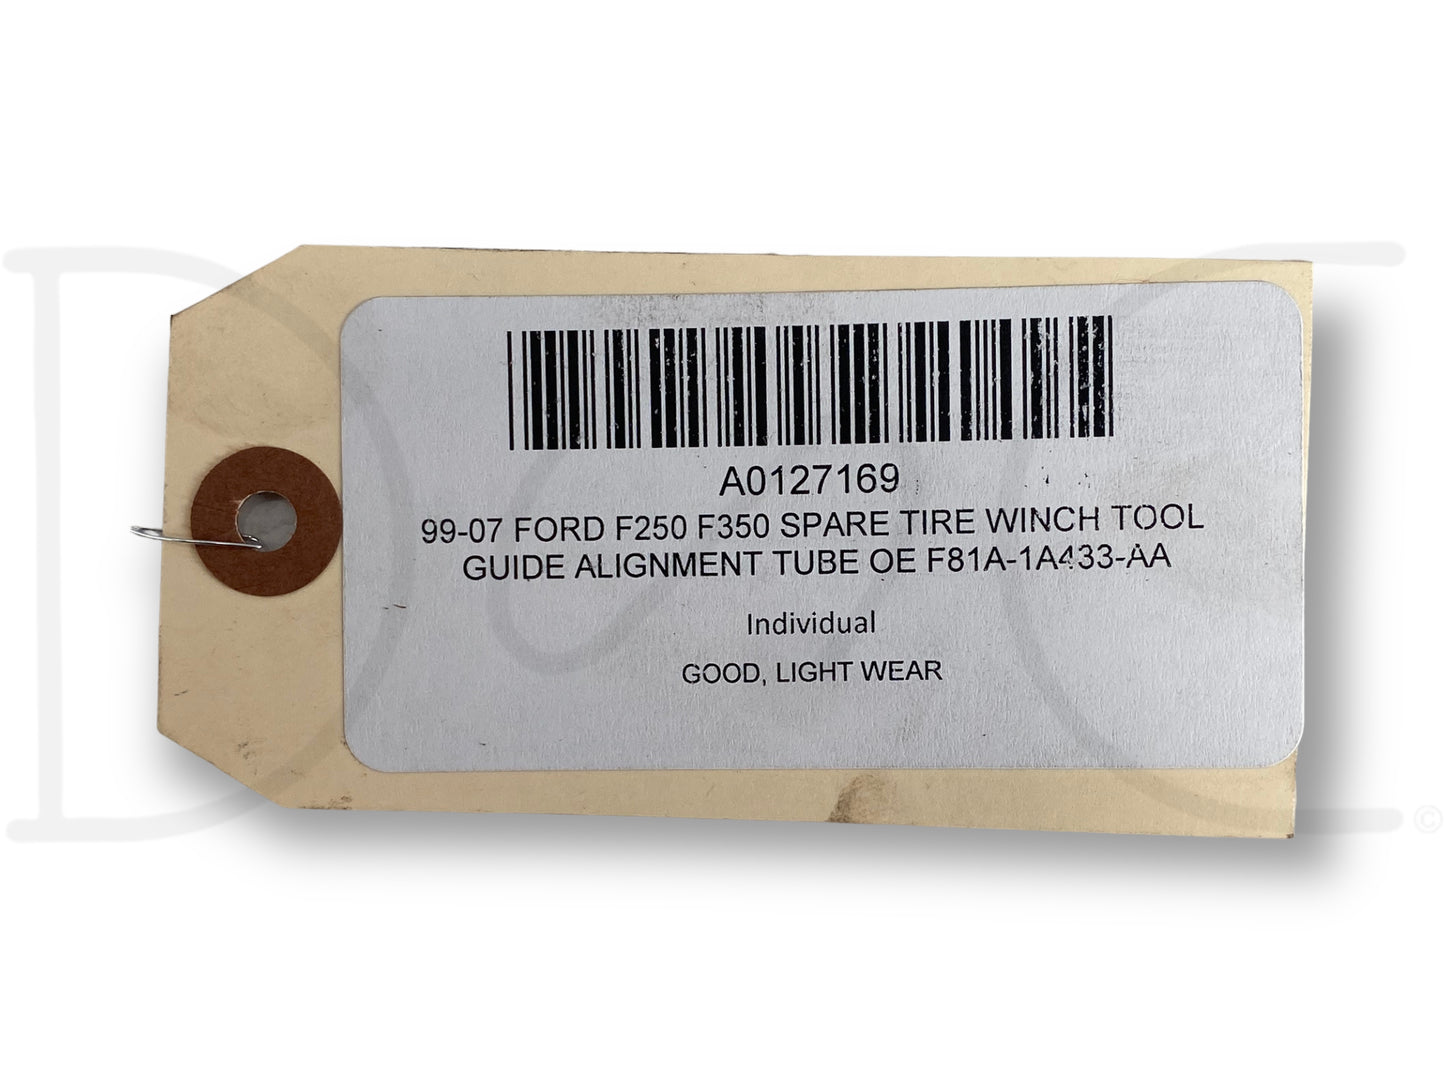 99-07 Ford F250 F350 Spare Tire Winch Tool Guide Alignment Tube OE F81A-1A433-AA